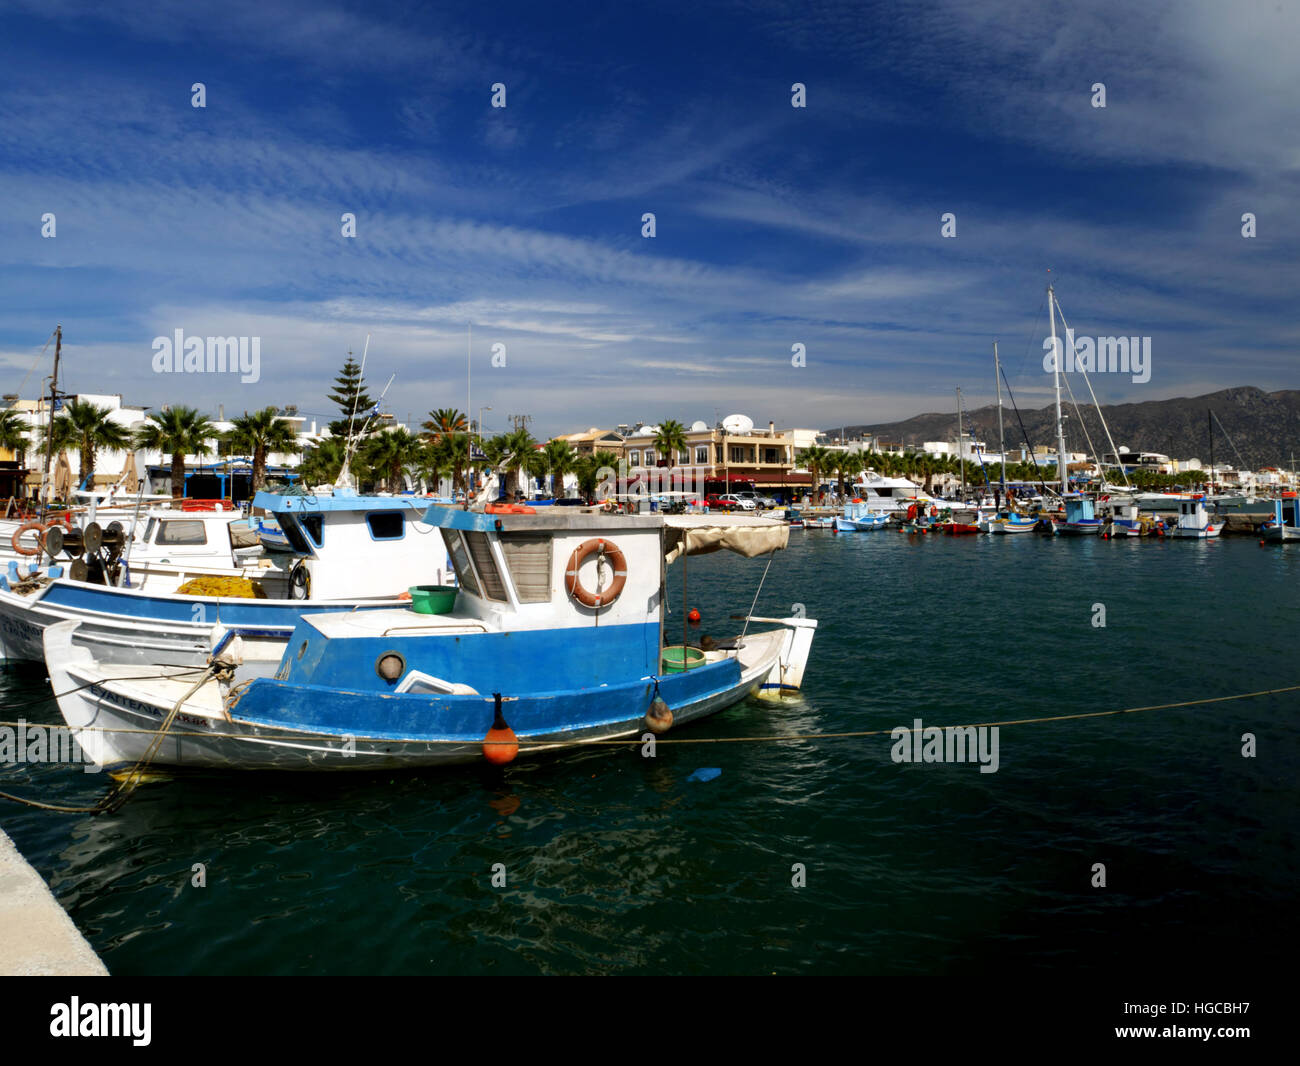 Boats moored in the harbour, Kardamena, Kos, Greece. Stock Photo